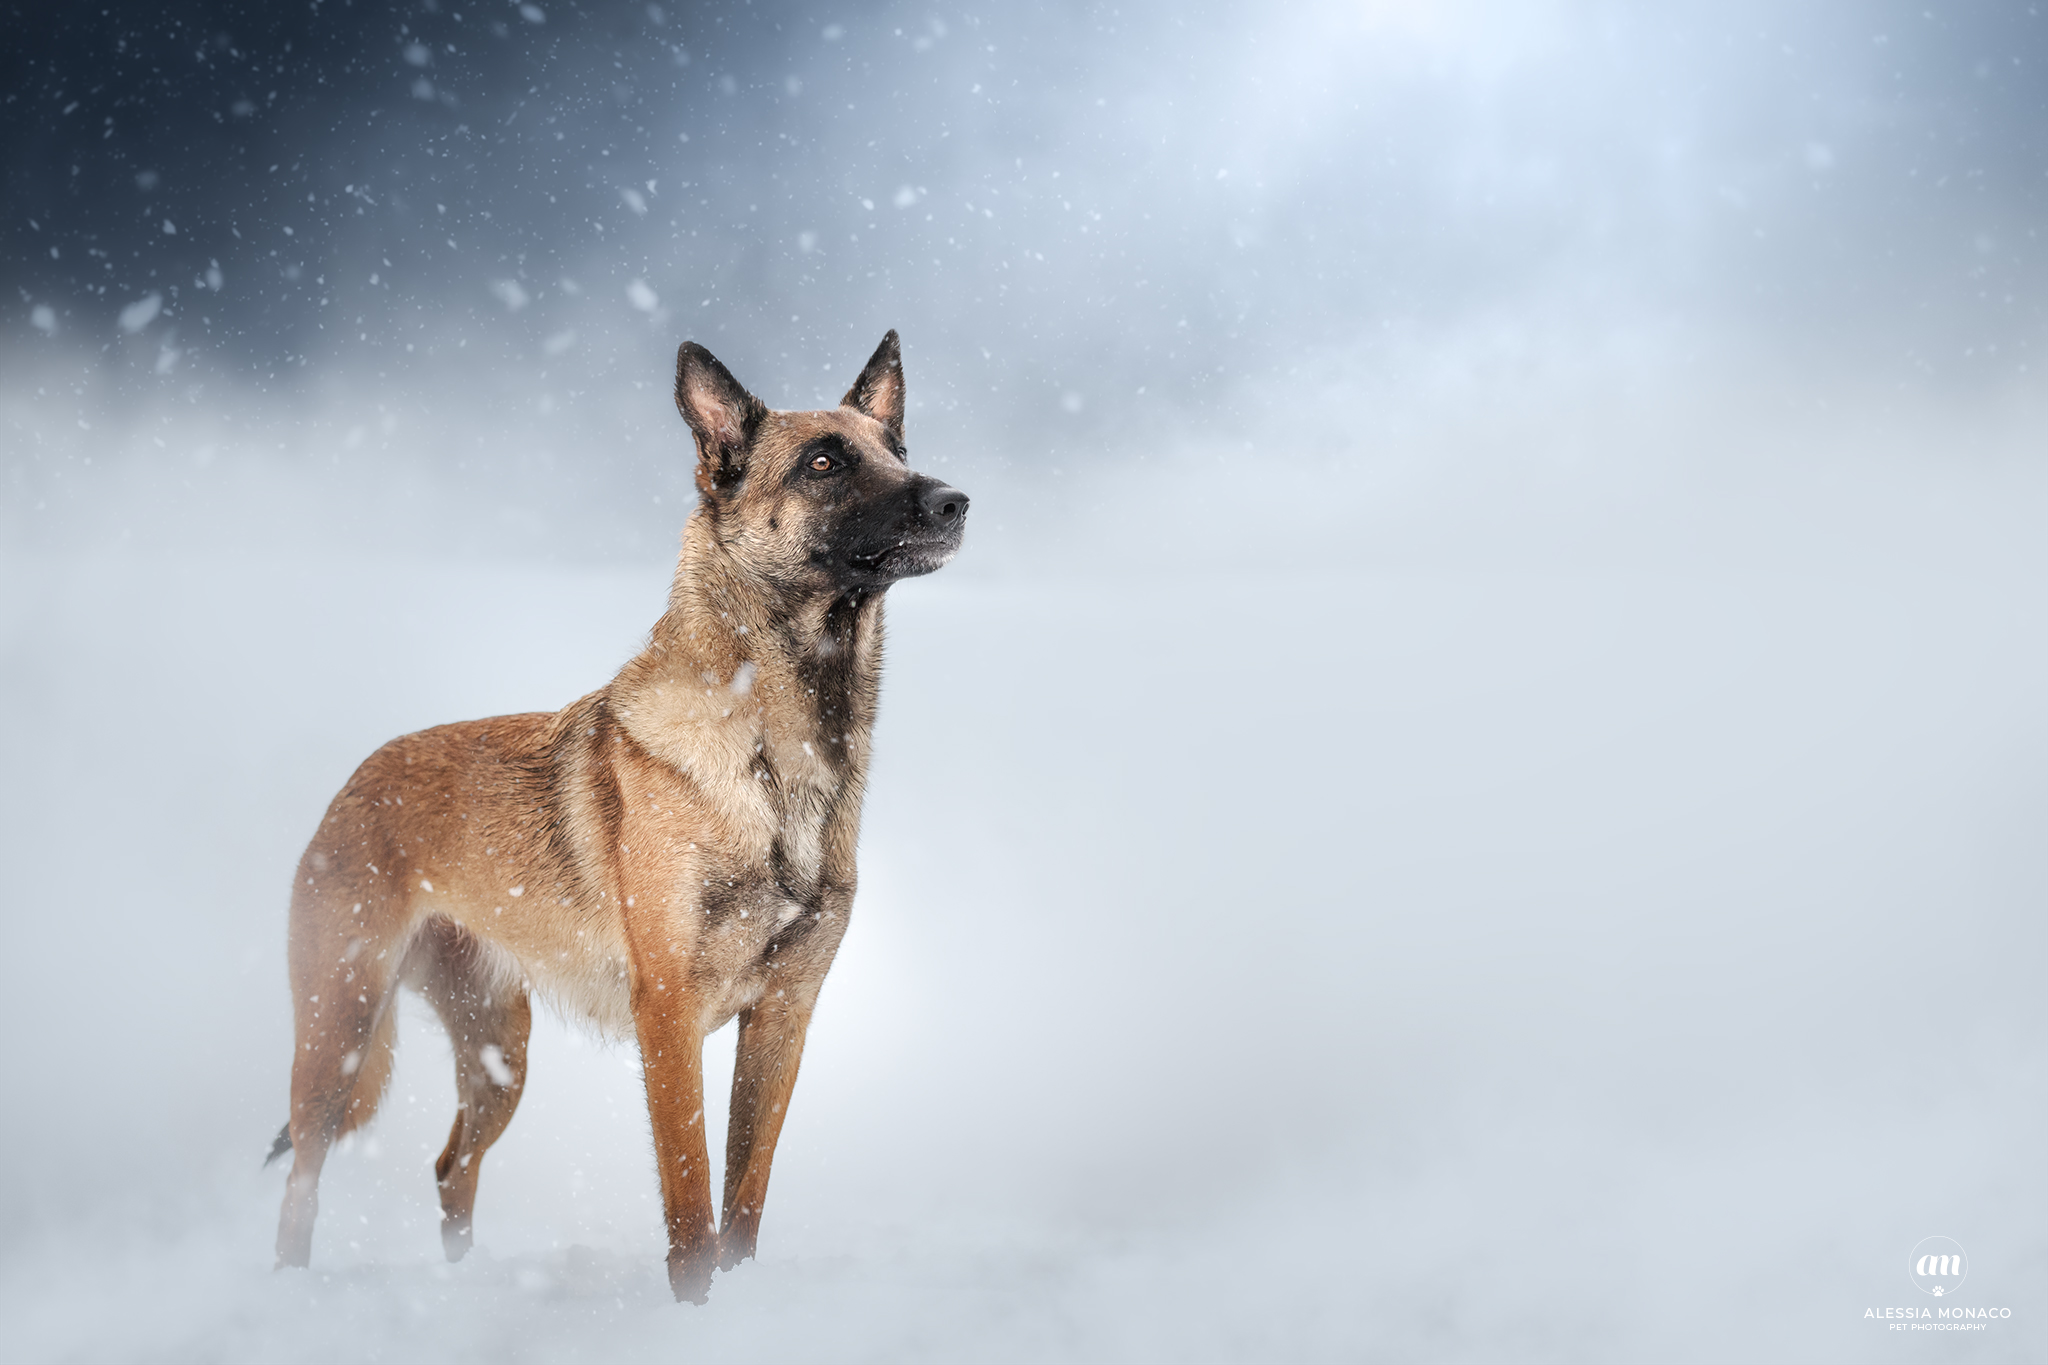 Malinois in the snow...